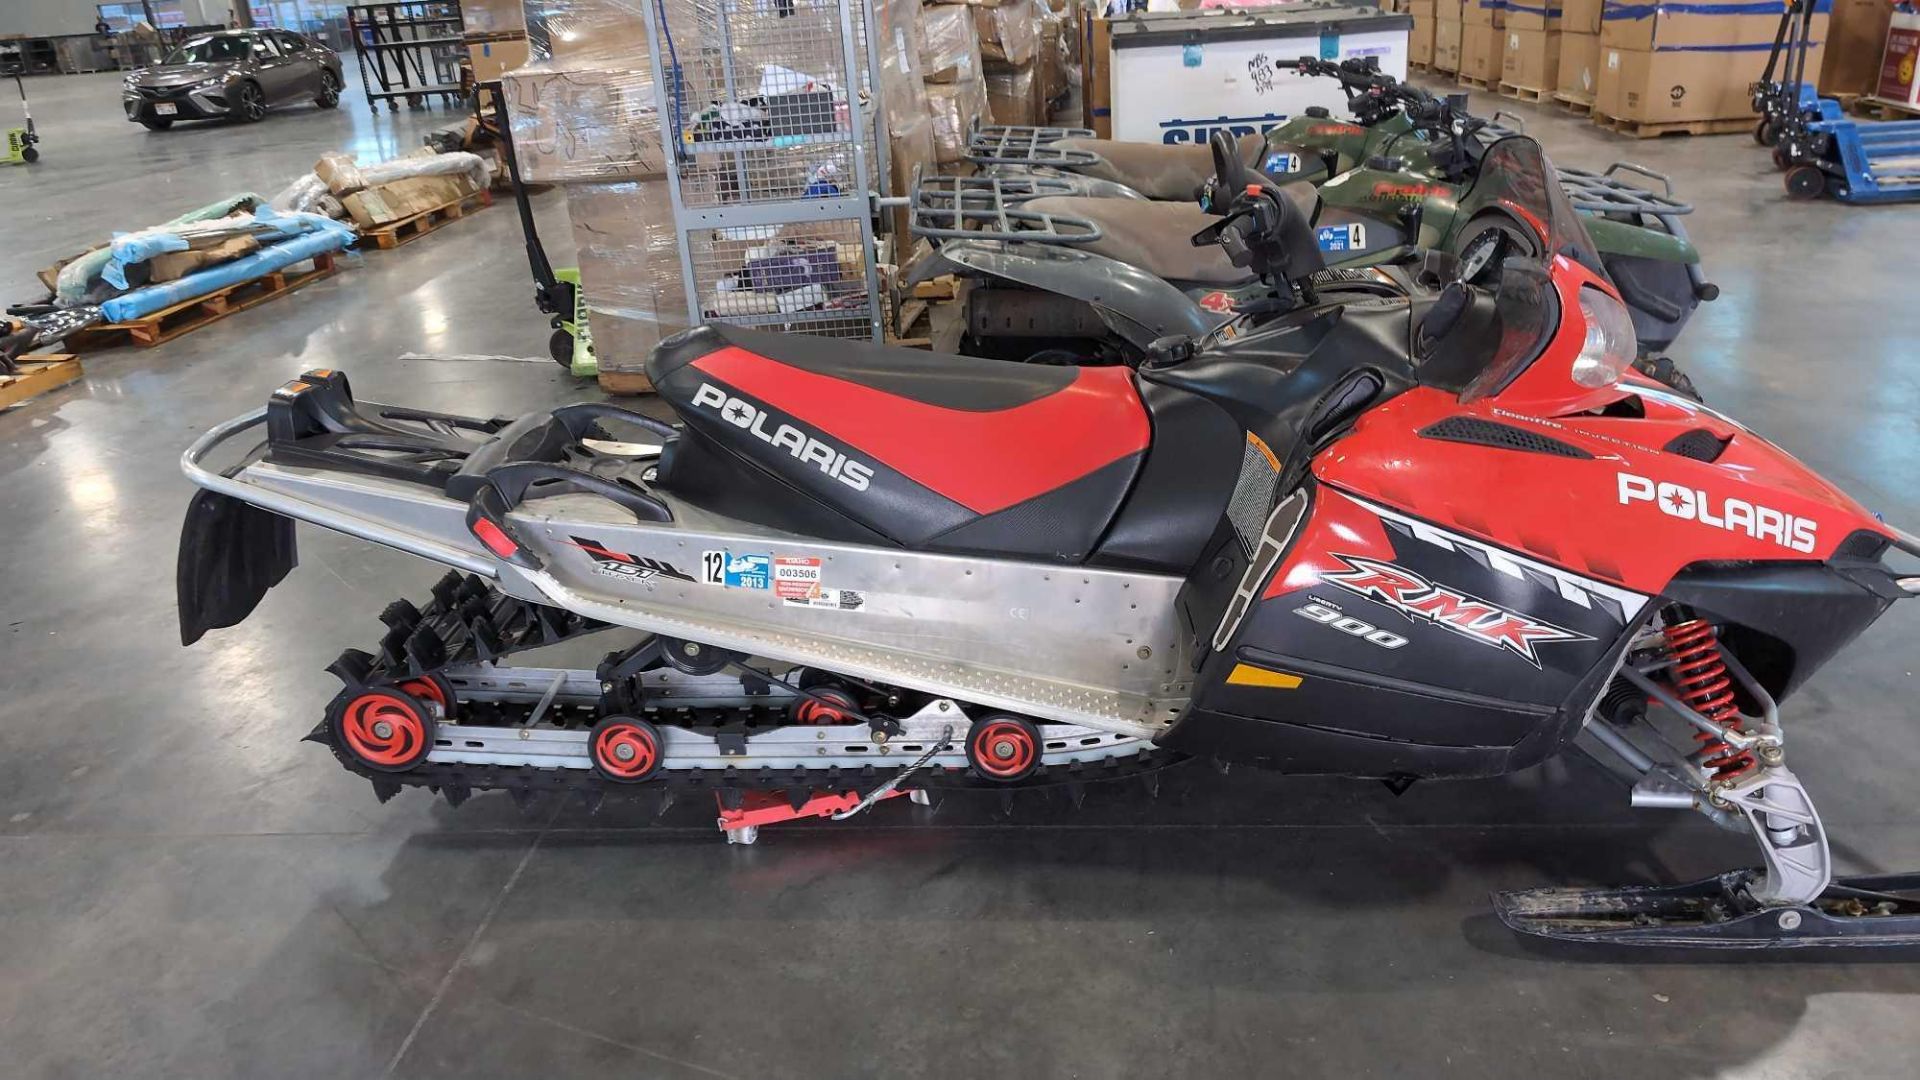 2006 Polaris 900 RMK Snowmobile, w/ 4,119 Miles runs and drives title in hand $195 Doc Fee - Image 3 of 6